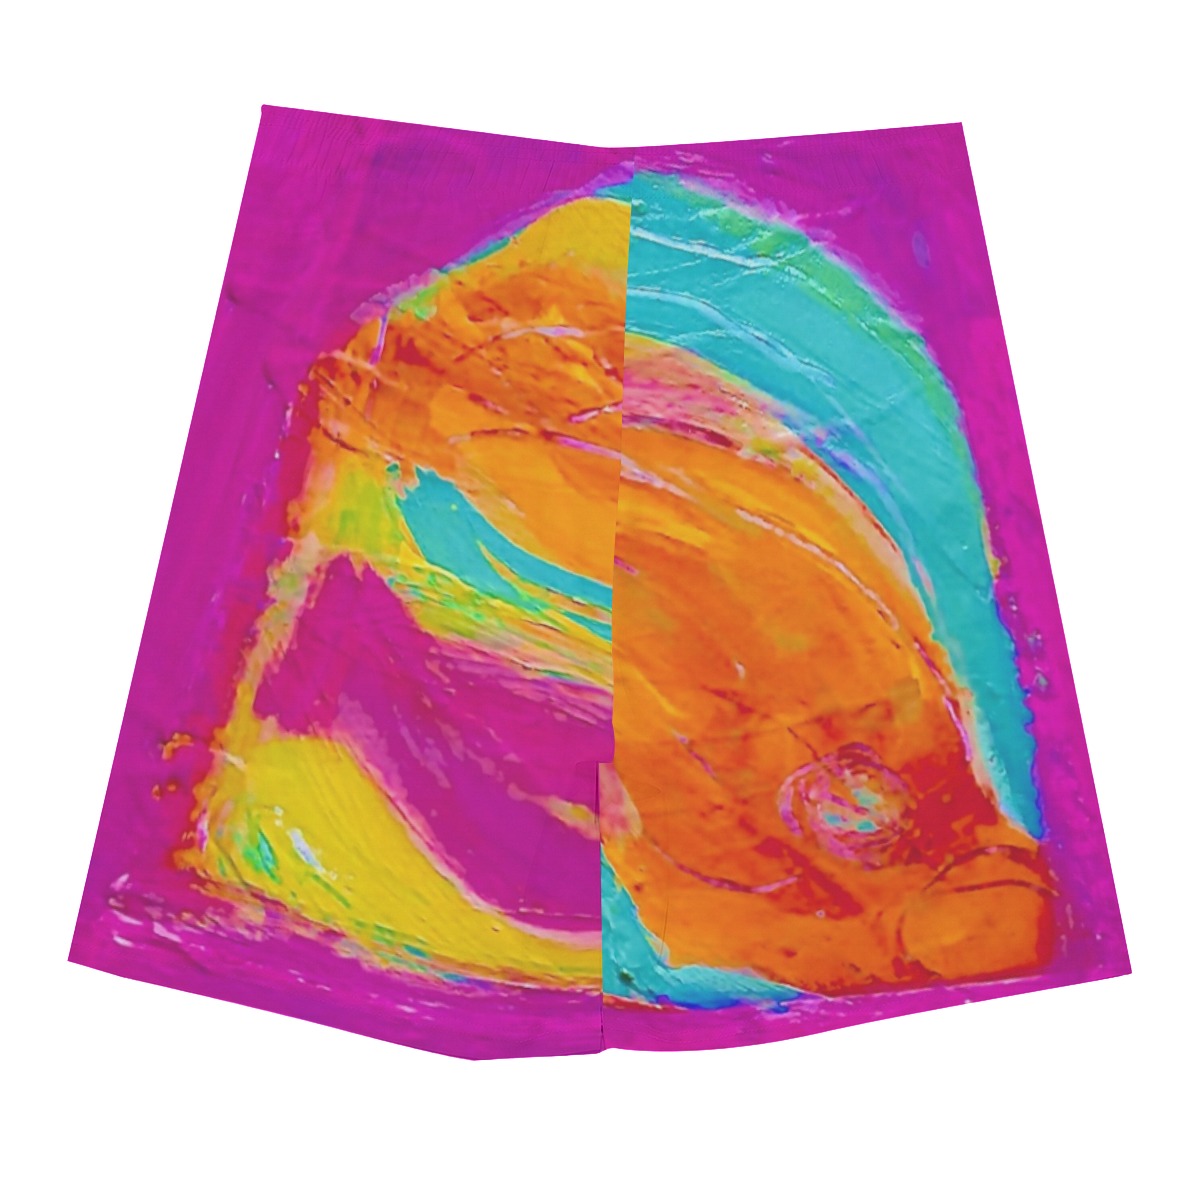 Men’s Beach Shorts With Elastic Waist Pink Fish Collection